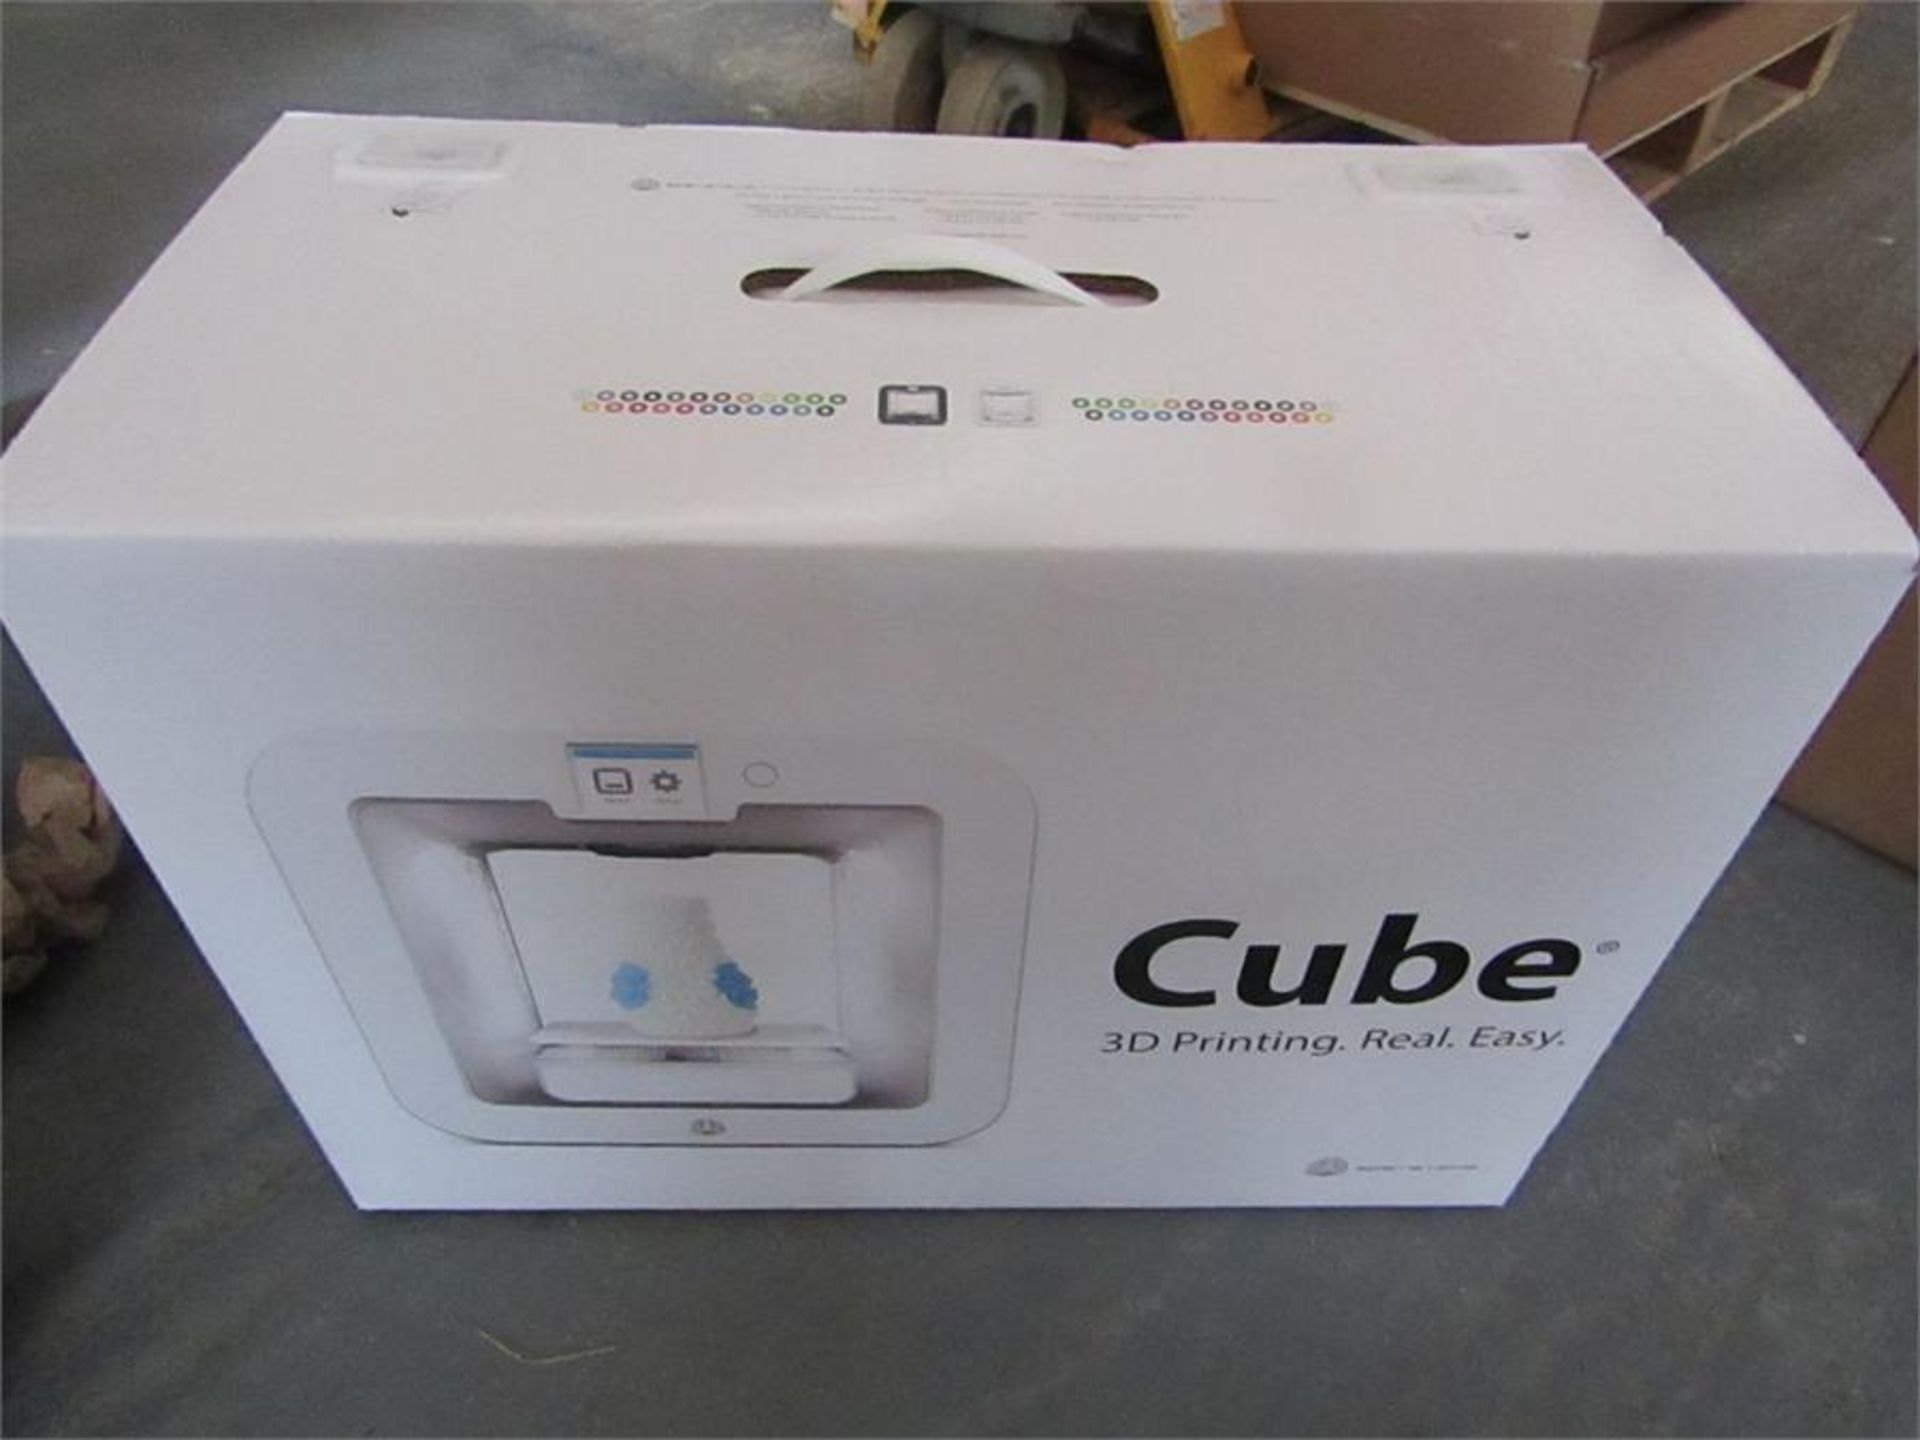 NEW & BOXED 3D Systems 3rd Gen Cube 3D Printer - Image 2 of 3